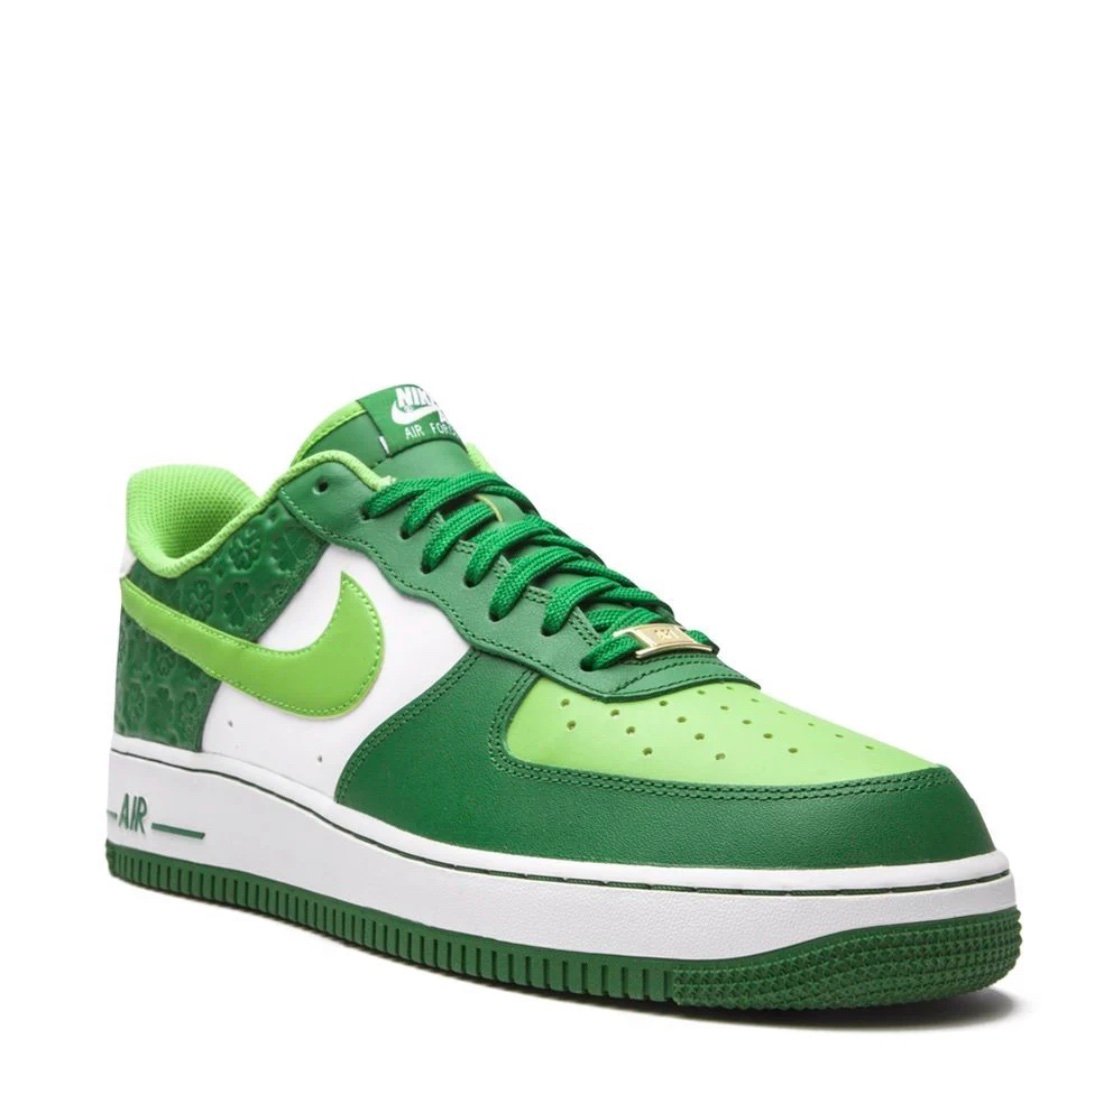 Air Force 1 Low “St. Patrick’s Day” – Footwear-room